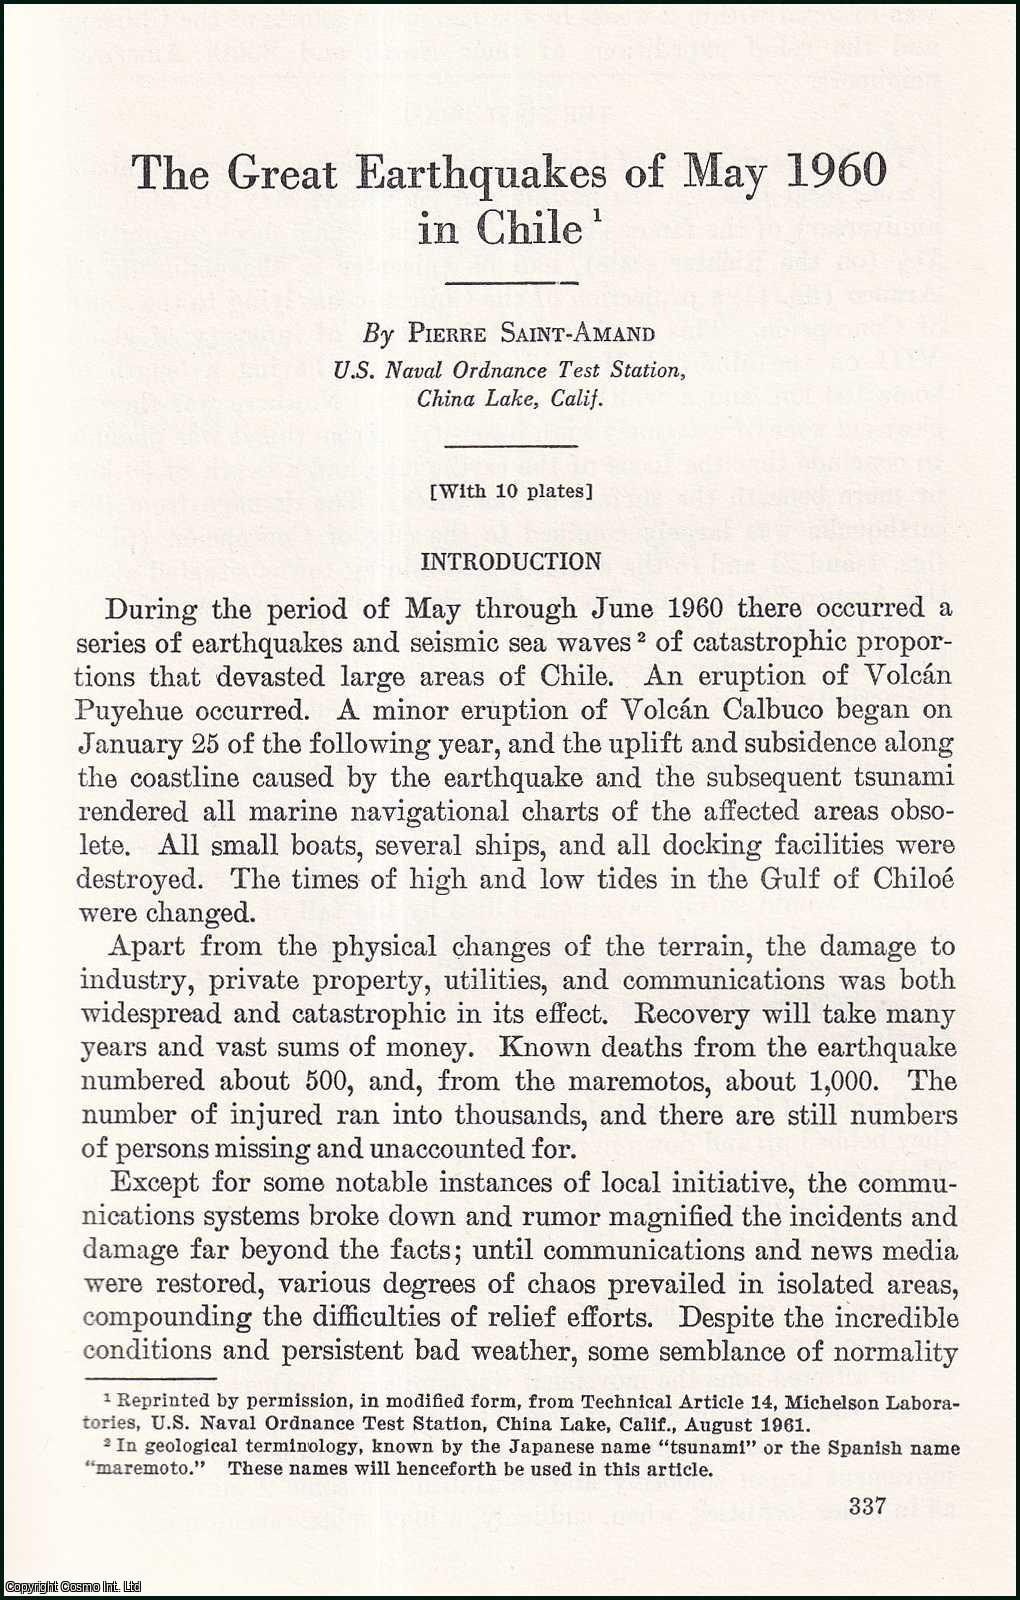 Pierre Saint-Amand, U.S. Naval Ordnance Test Station, China Lake, California. - The Great Earthquakes of May, 1960 in Chile. An uncommon original article from the Report of the Smithsonian Institution, 1962.